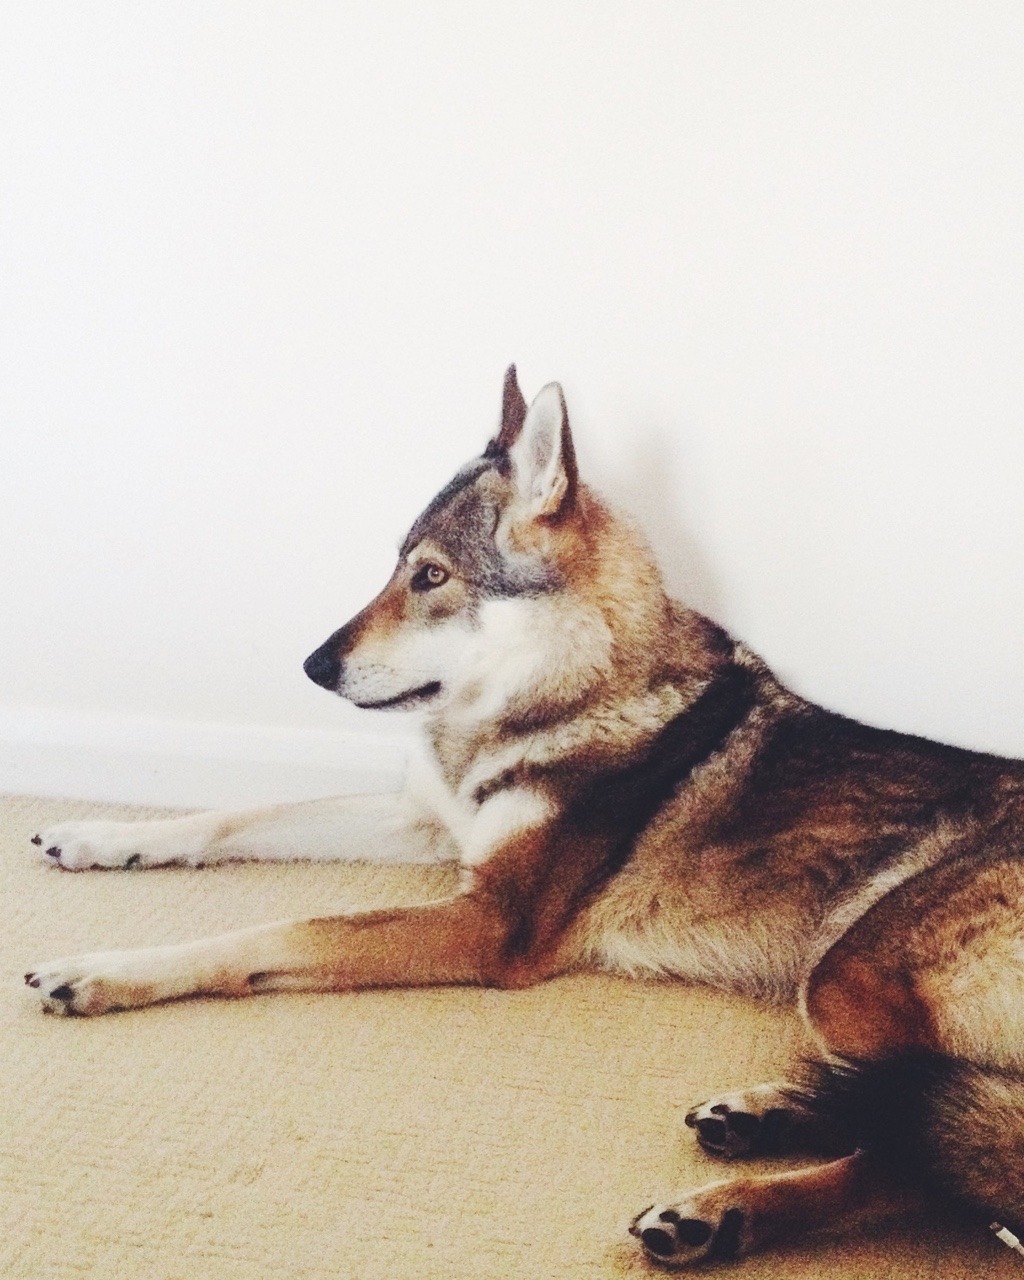 the-little-wolfdog:
“ Staring into nothingness as she was taken off charge too early (look bottom right)
”